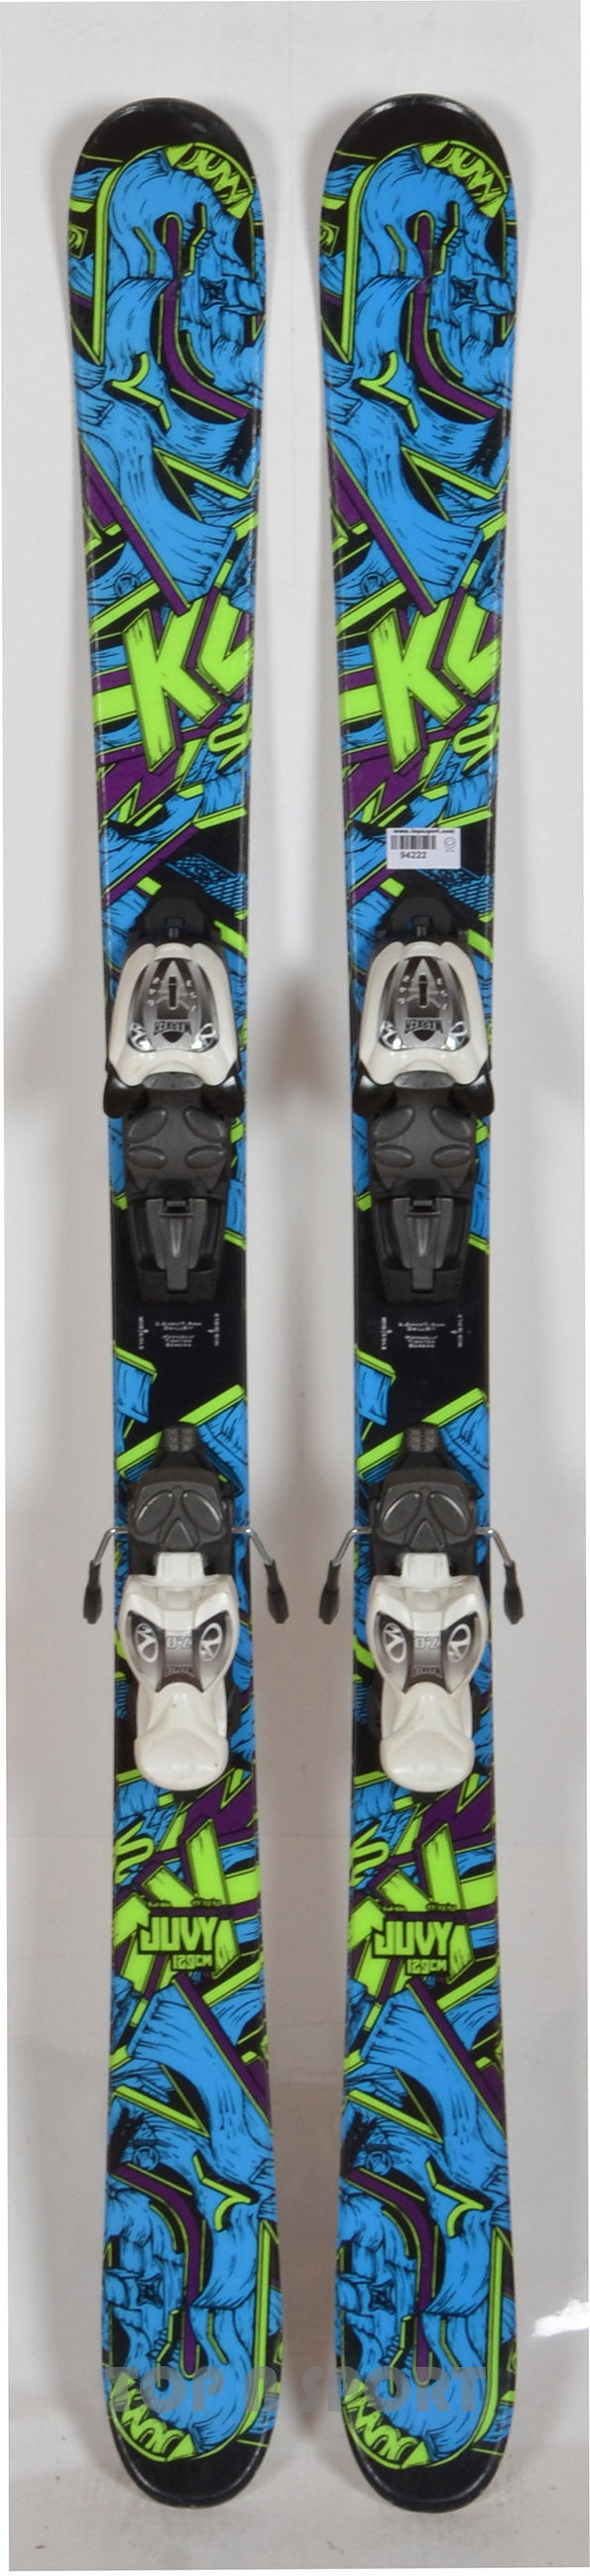 K2 JUVY blue - skis d'occasion Junior